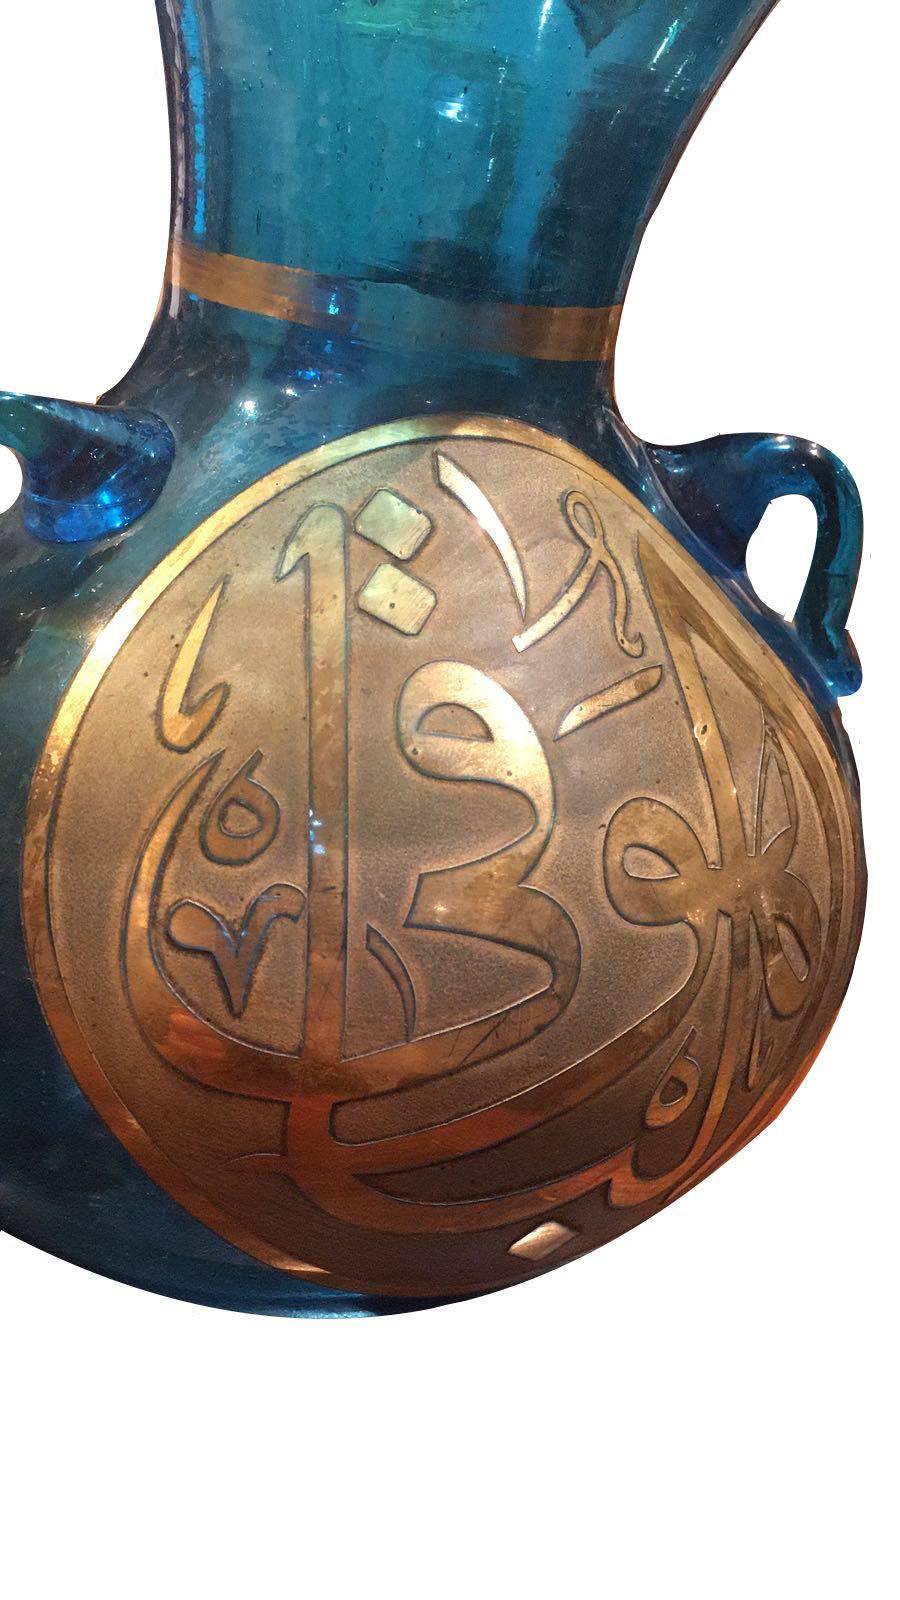 Late 19th century-early 20th century, French Mosque lantern with Arabic calligraphy made for the Islamic market

Measure: H 23cm
W 19cm.